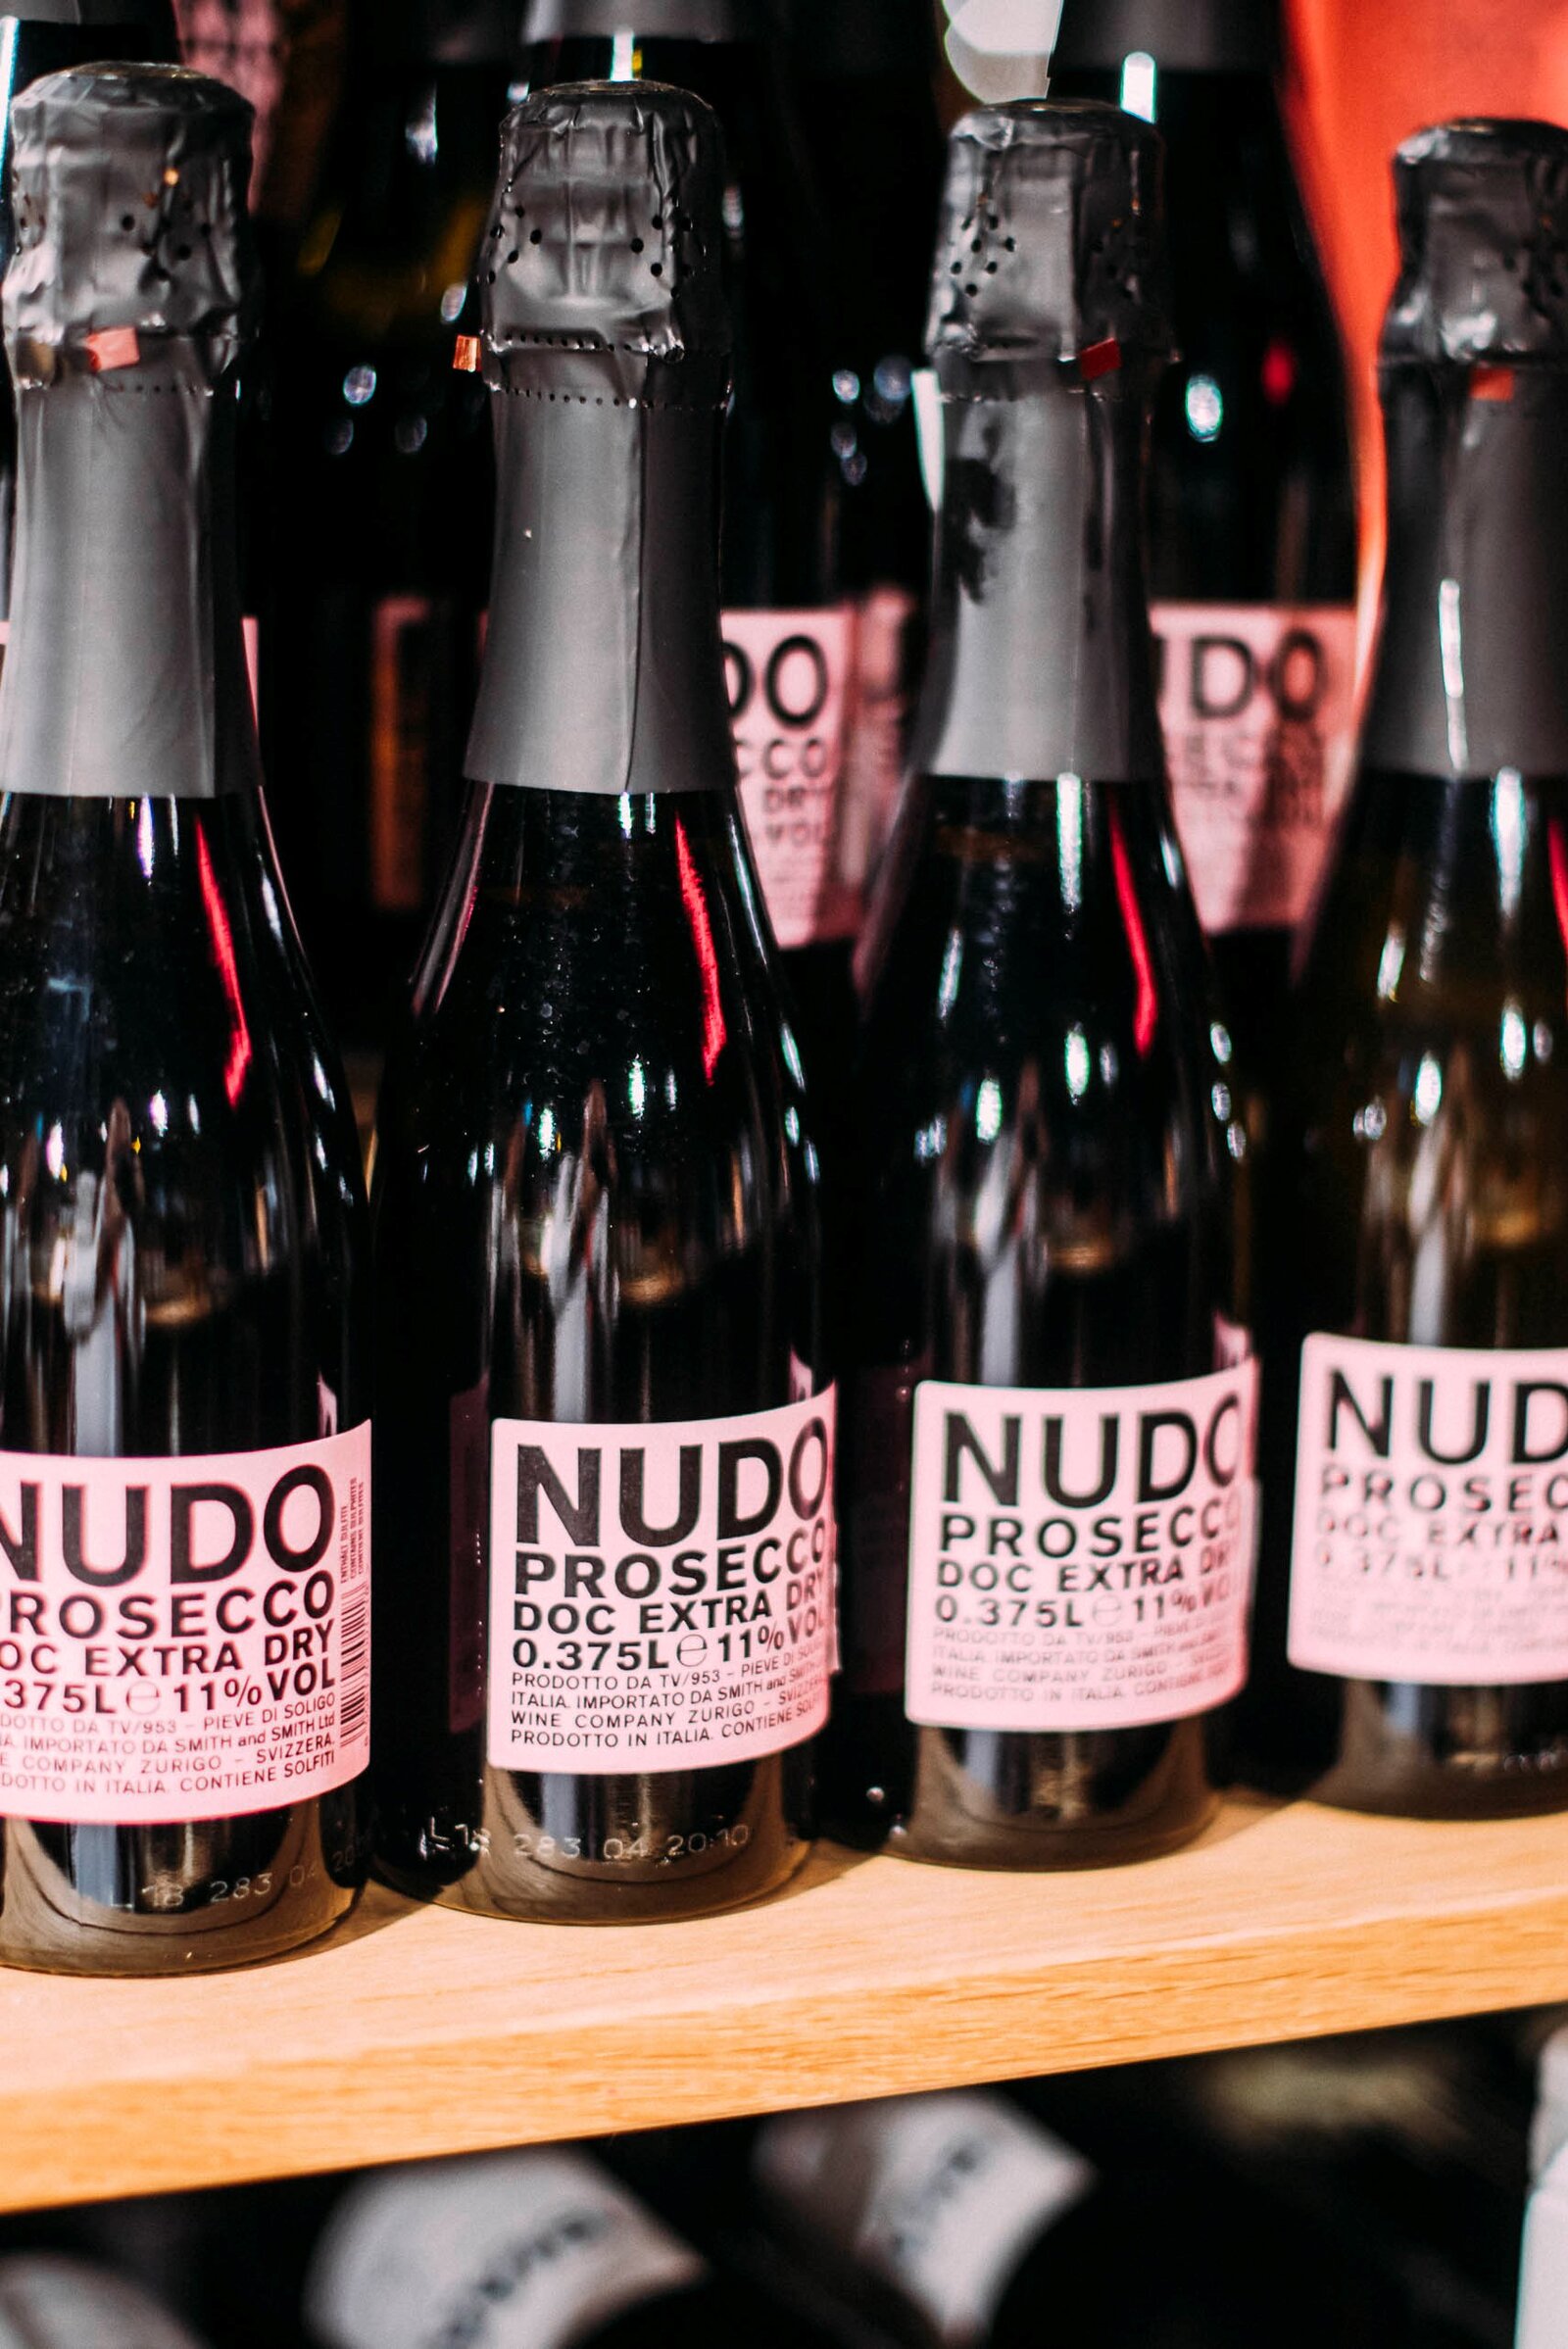 It`s all about Nudo